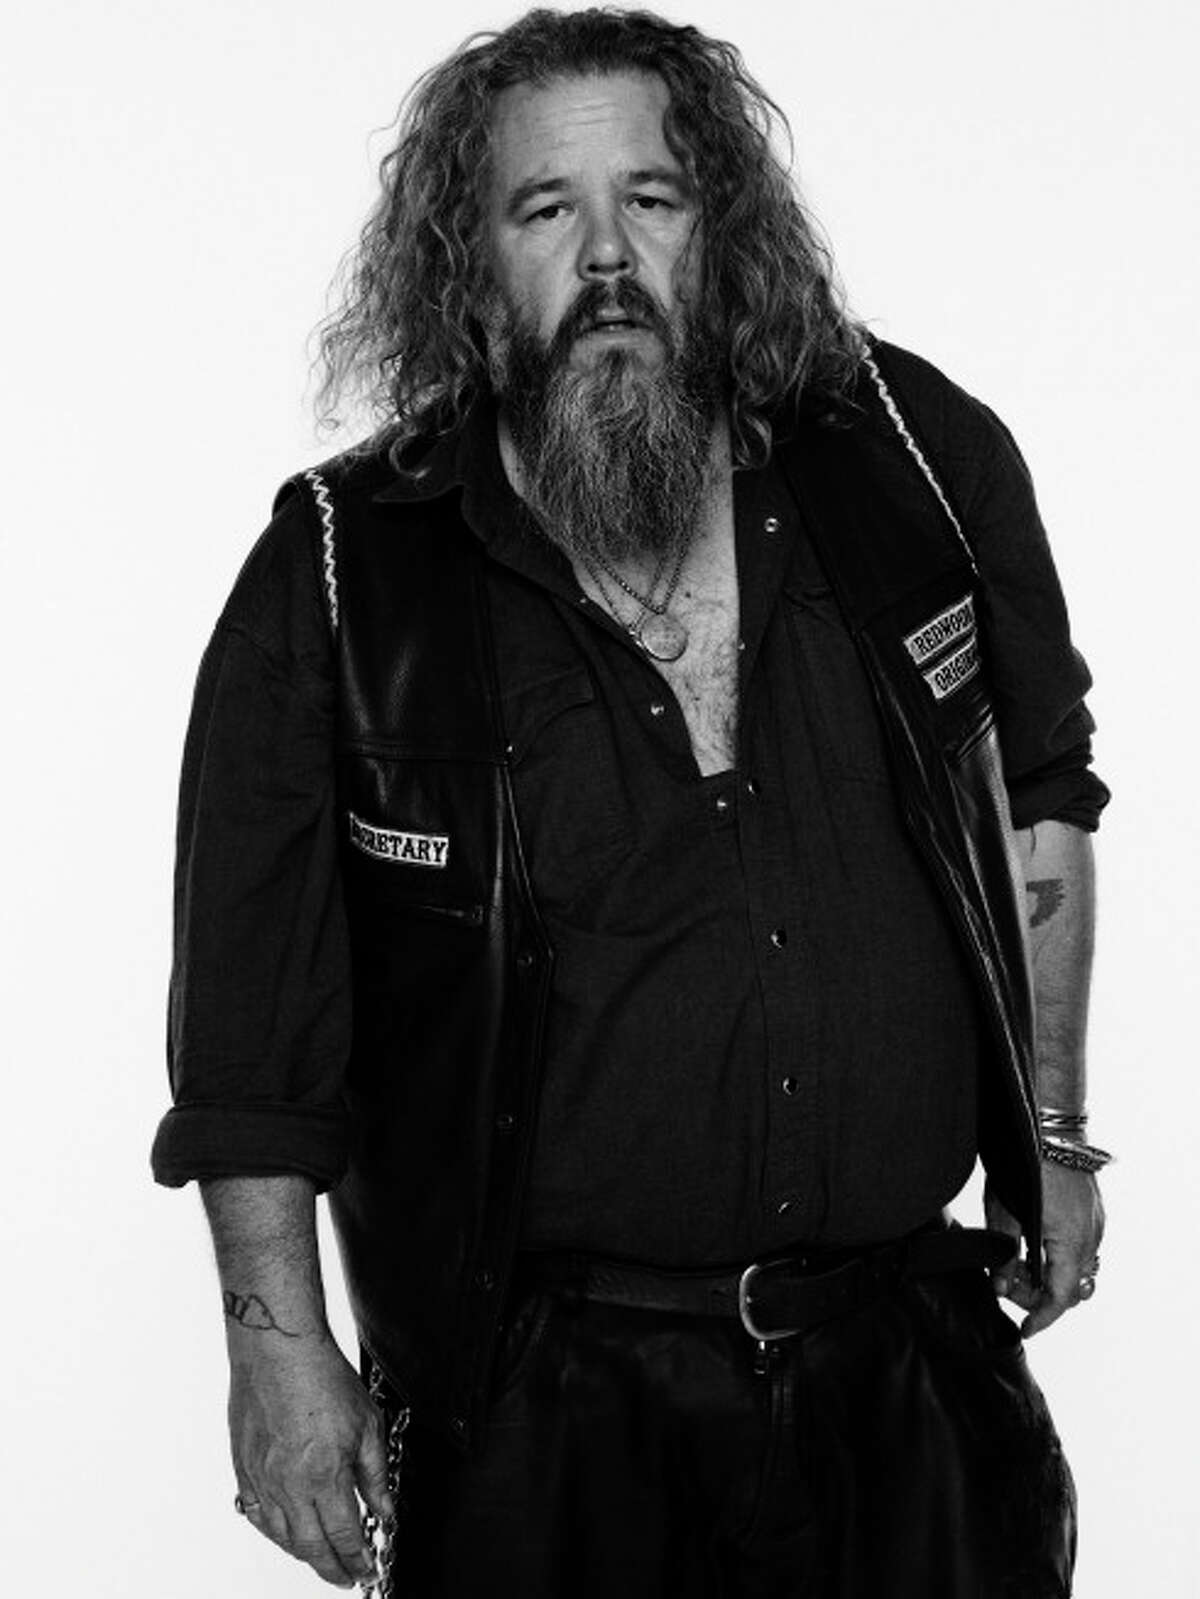 Stars from "Sons of Anarchy" will attend this year's biker event Oct. 31-Nov. 3 on Galveston Island. Here are some highlights from years past. Mark Boone Junior, who plays Bobby, will be there.